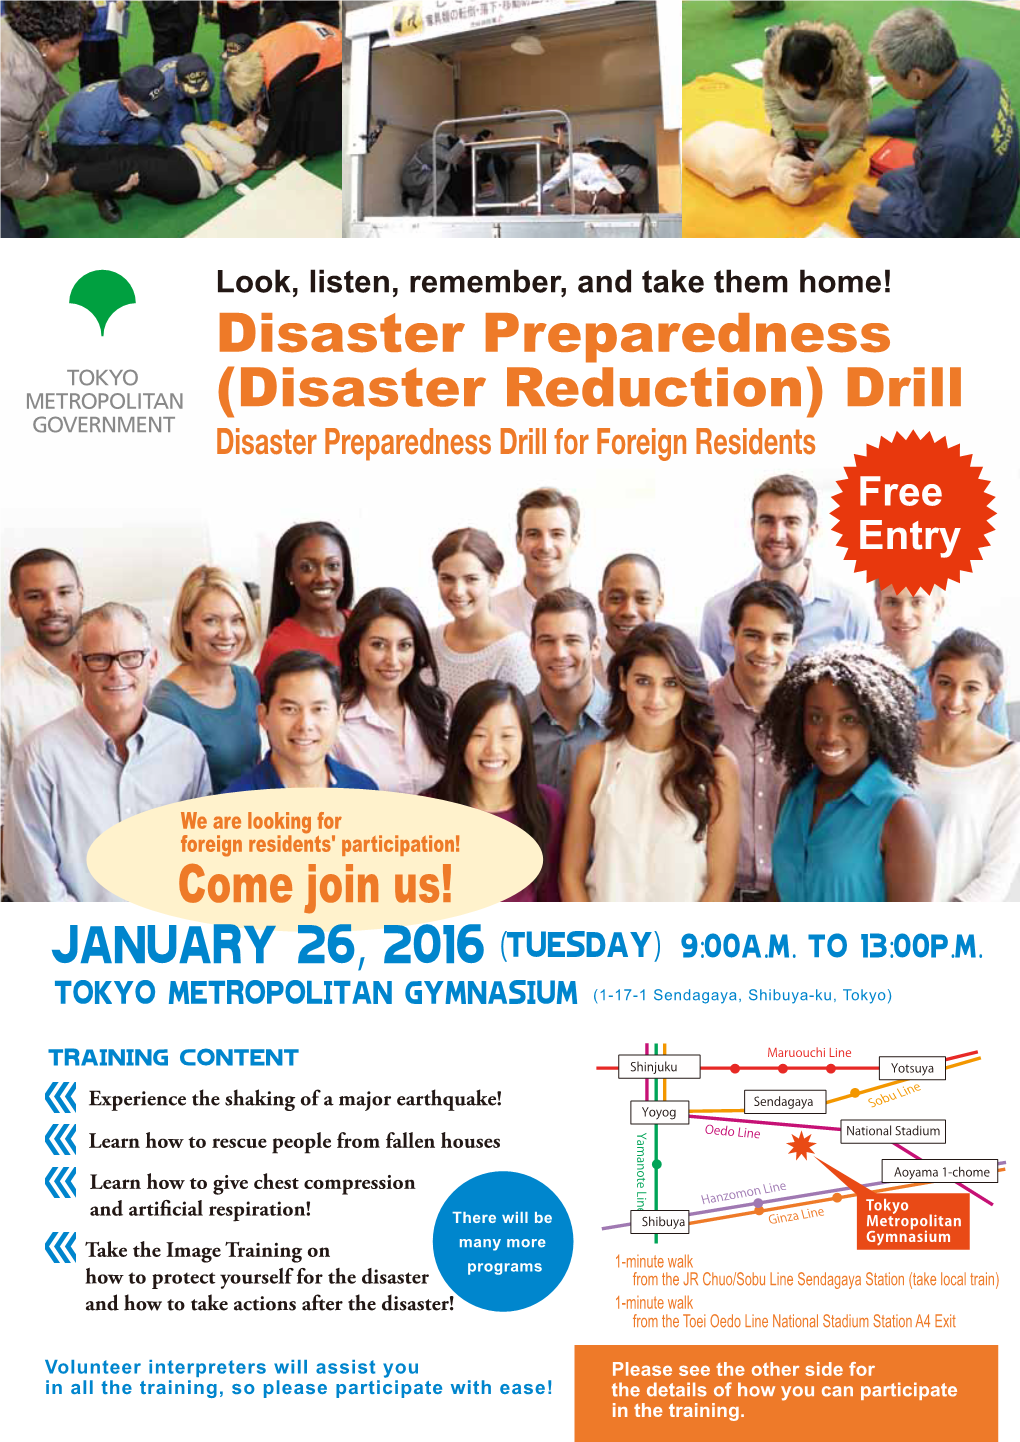 Disaster Preparedness Drill for Foreign Residents Free Entry